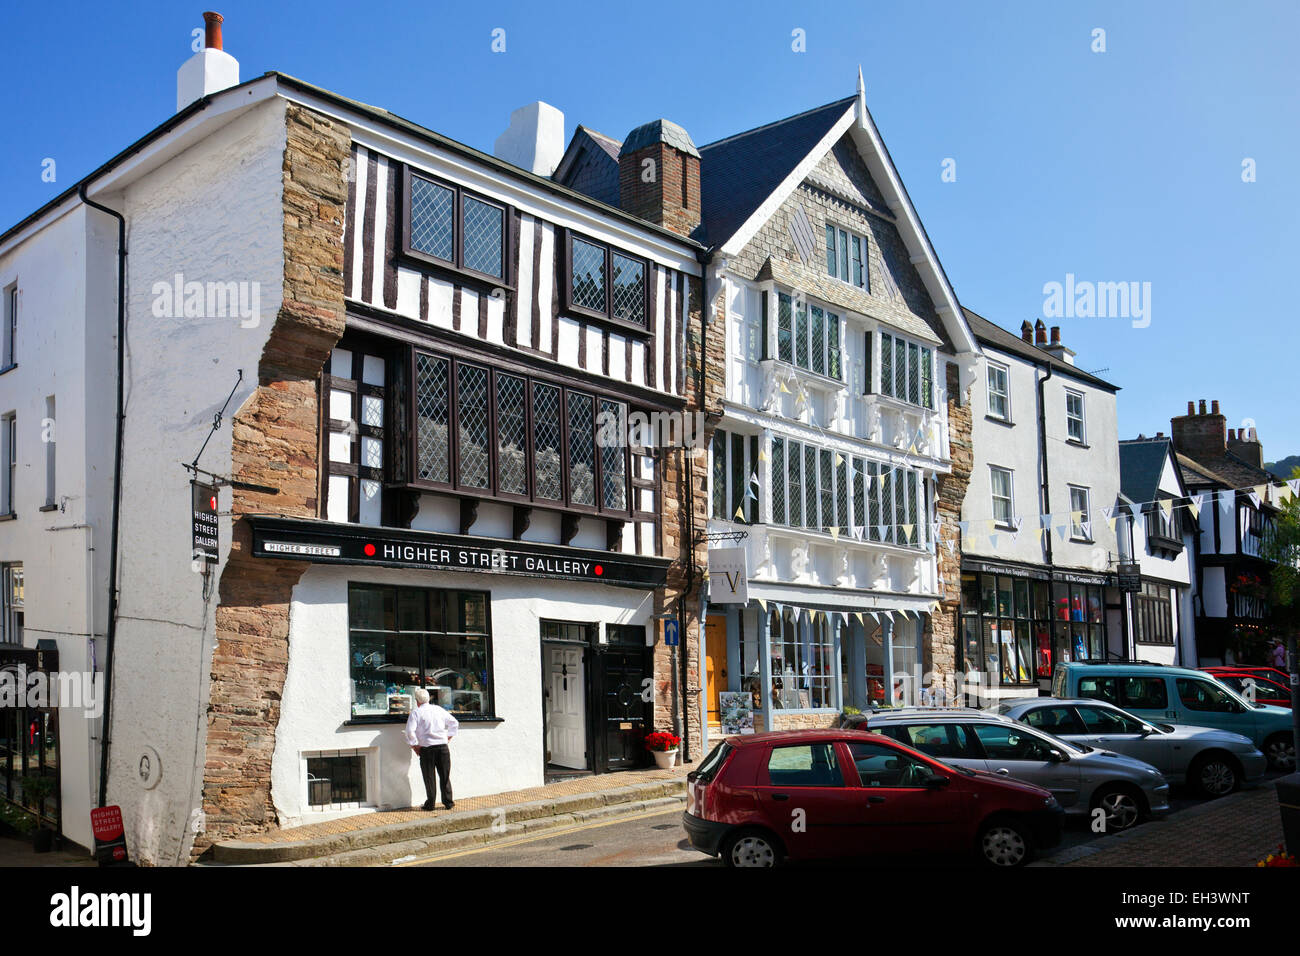 The Tudor buildings in Higher Street Dartmouth restored after the disastrous fire of May 2010, Devon, England, UK Stock Photo